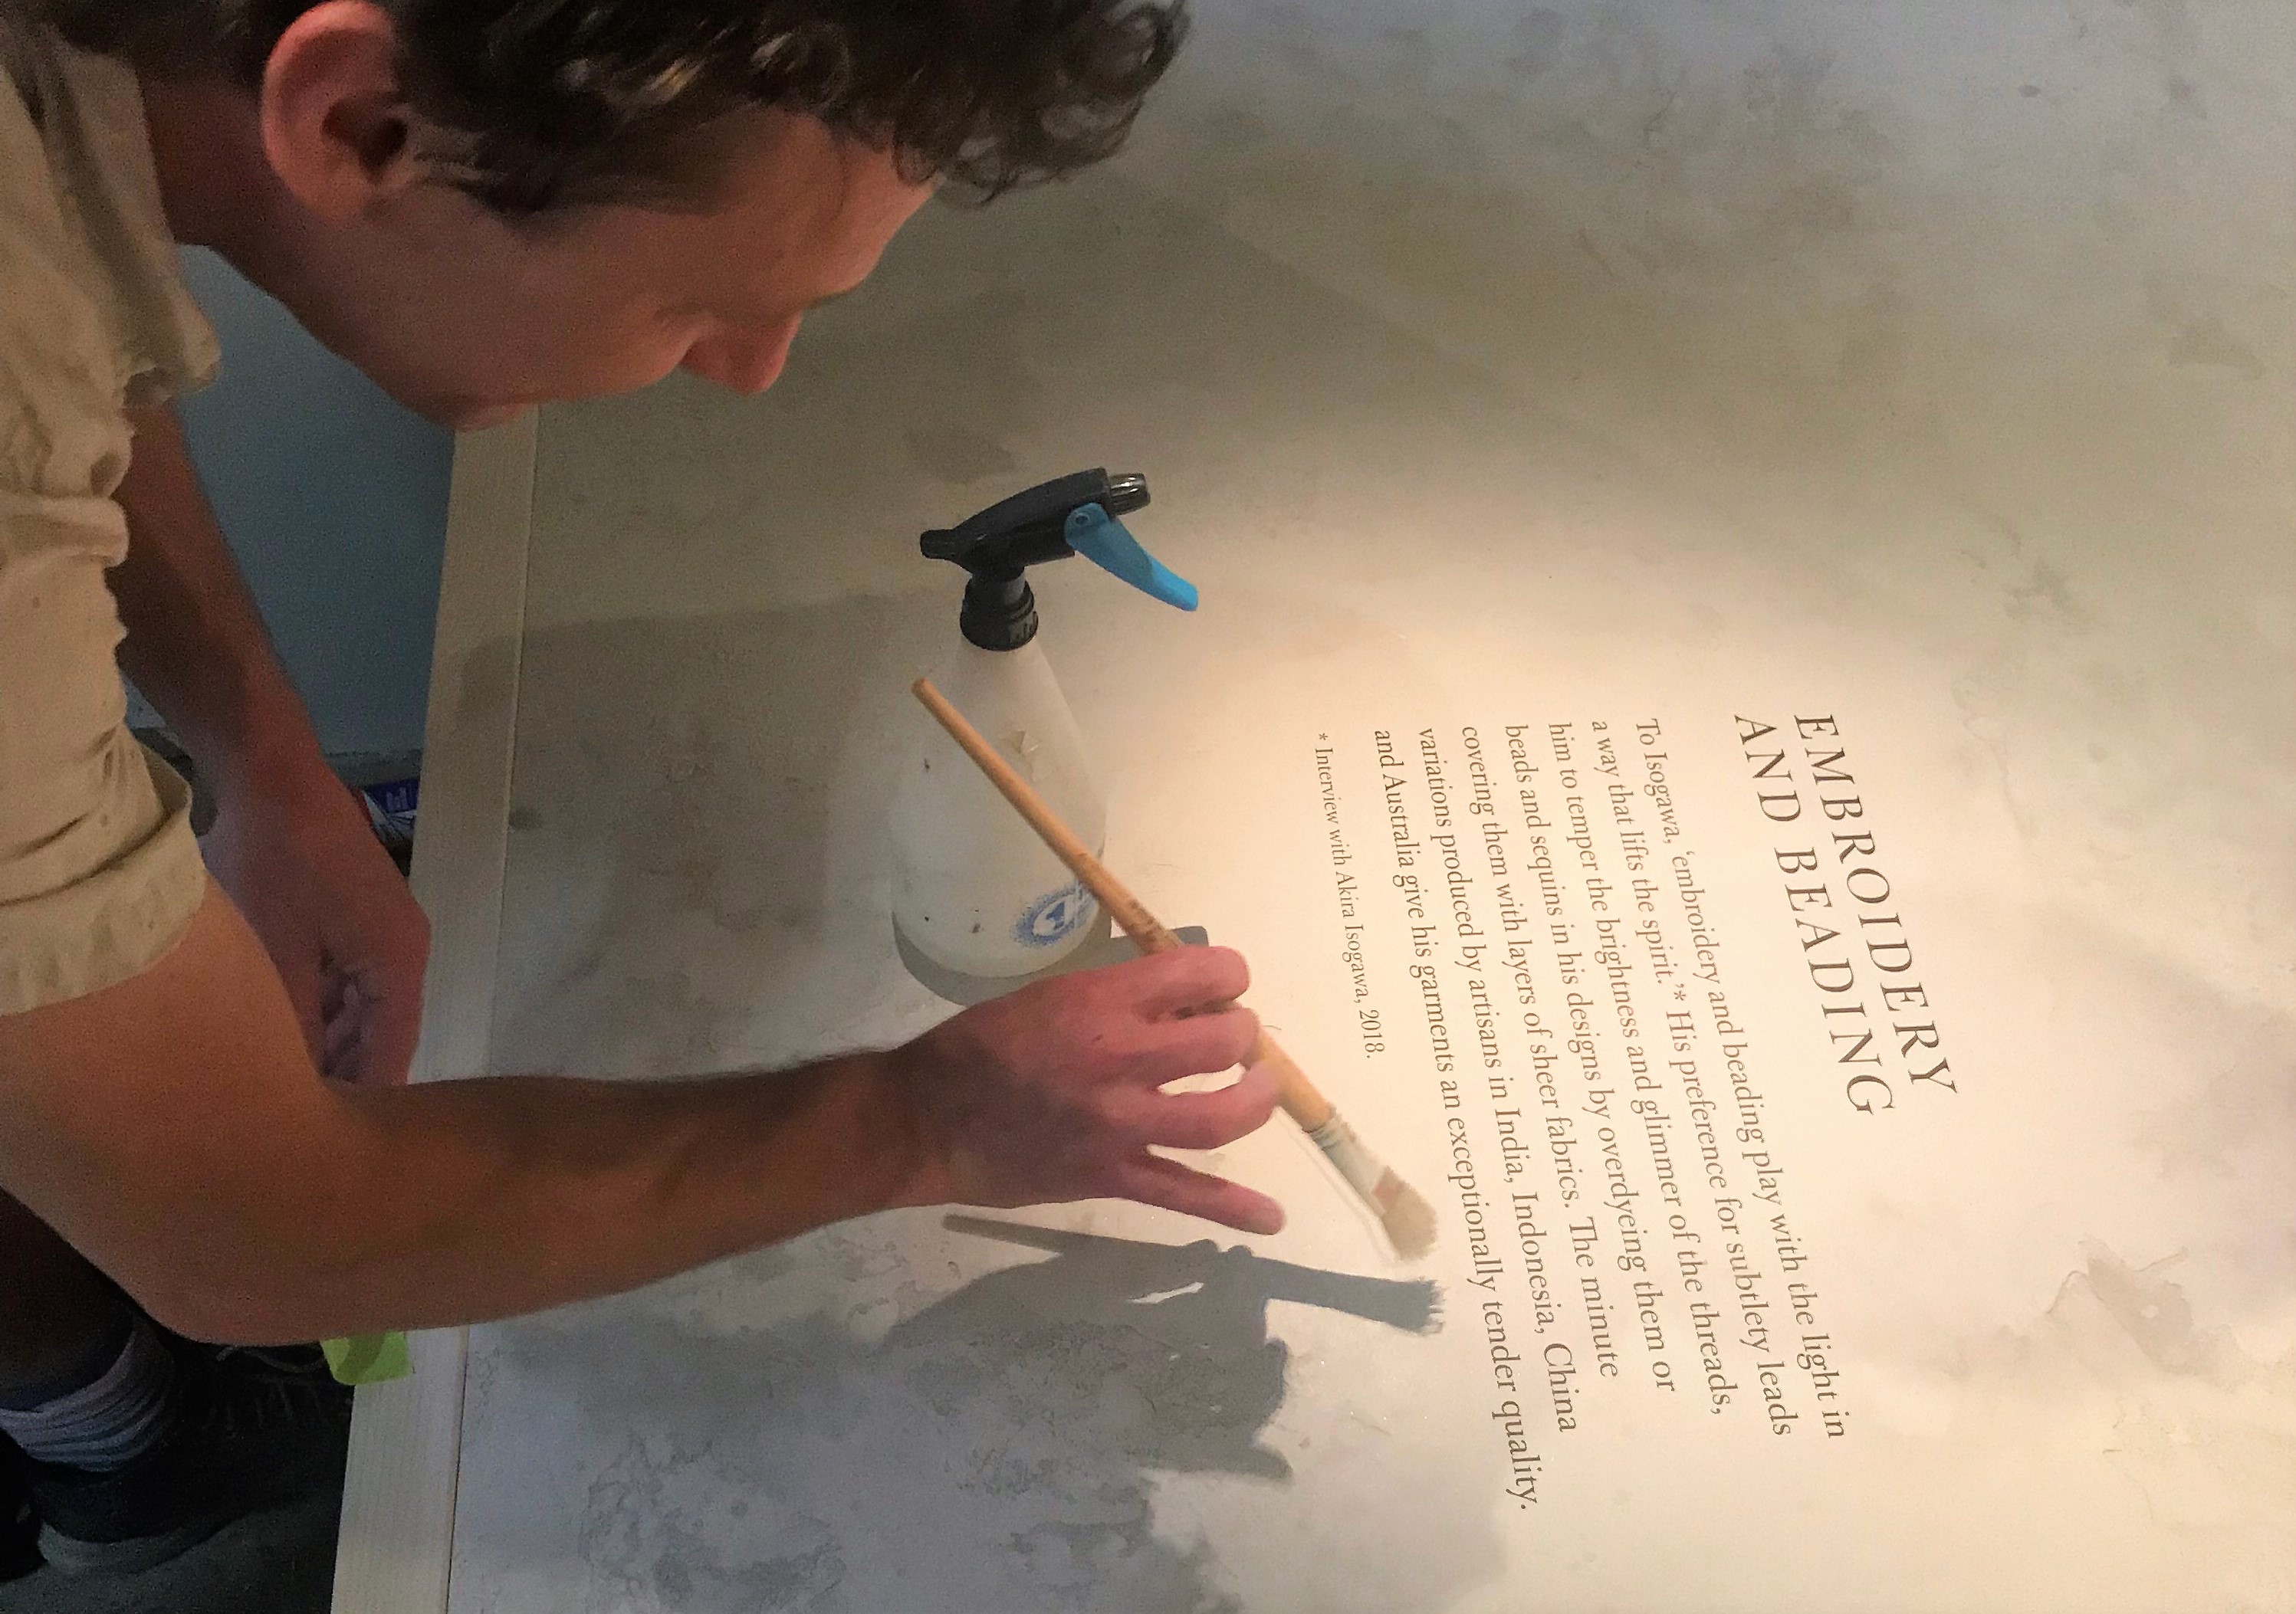 A man with a paintbrush poised over a plasterwork plinth. Written on the plinth is exhibition text with the heading 'embroidering and beading'. There is a spray bottle next to the man's hand.